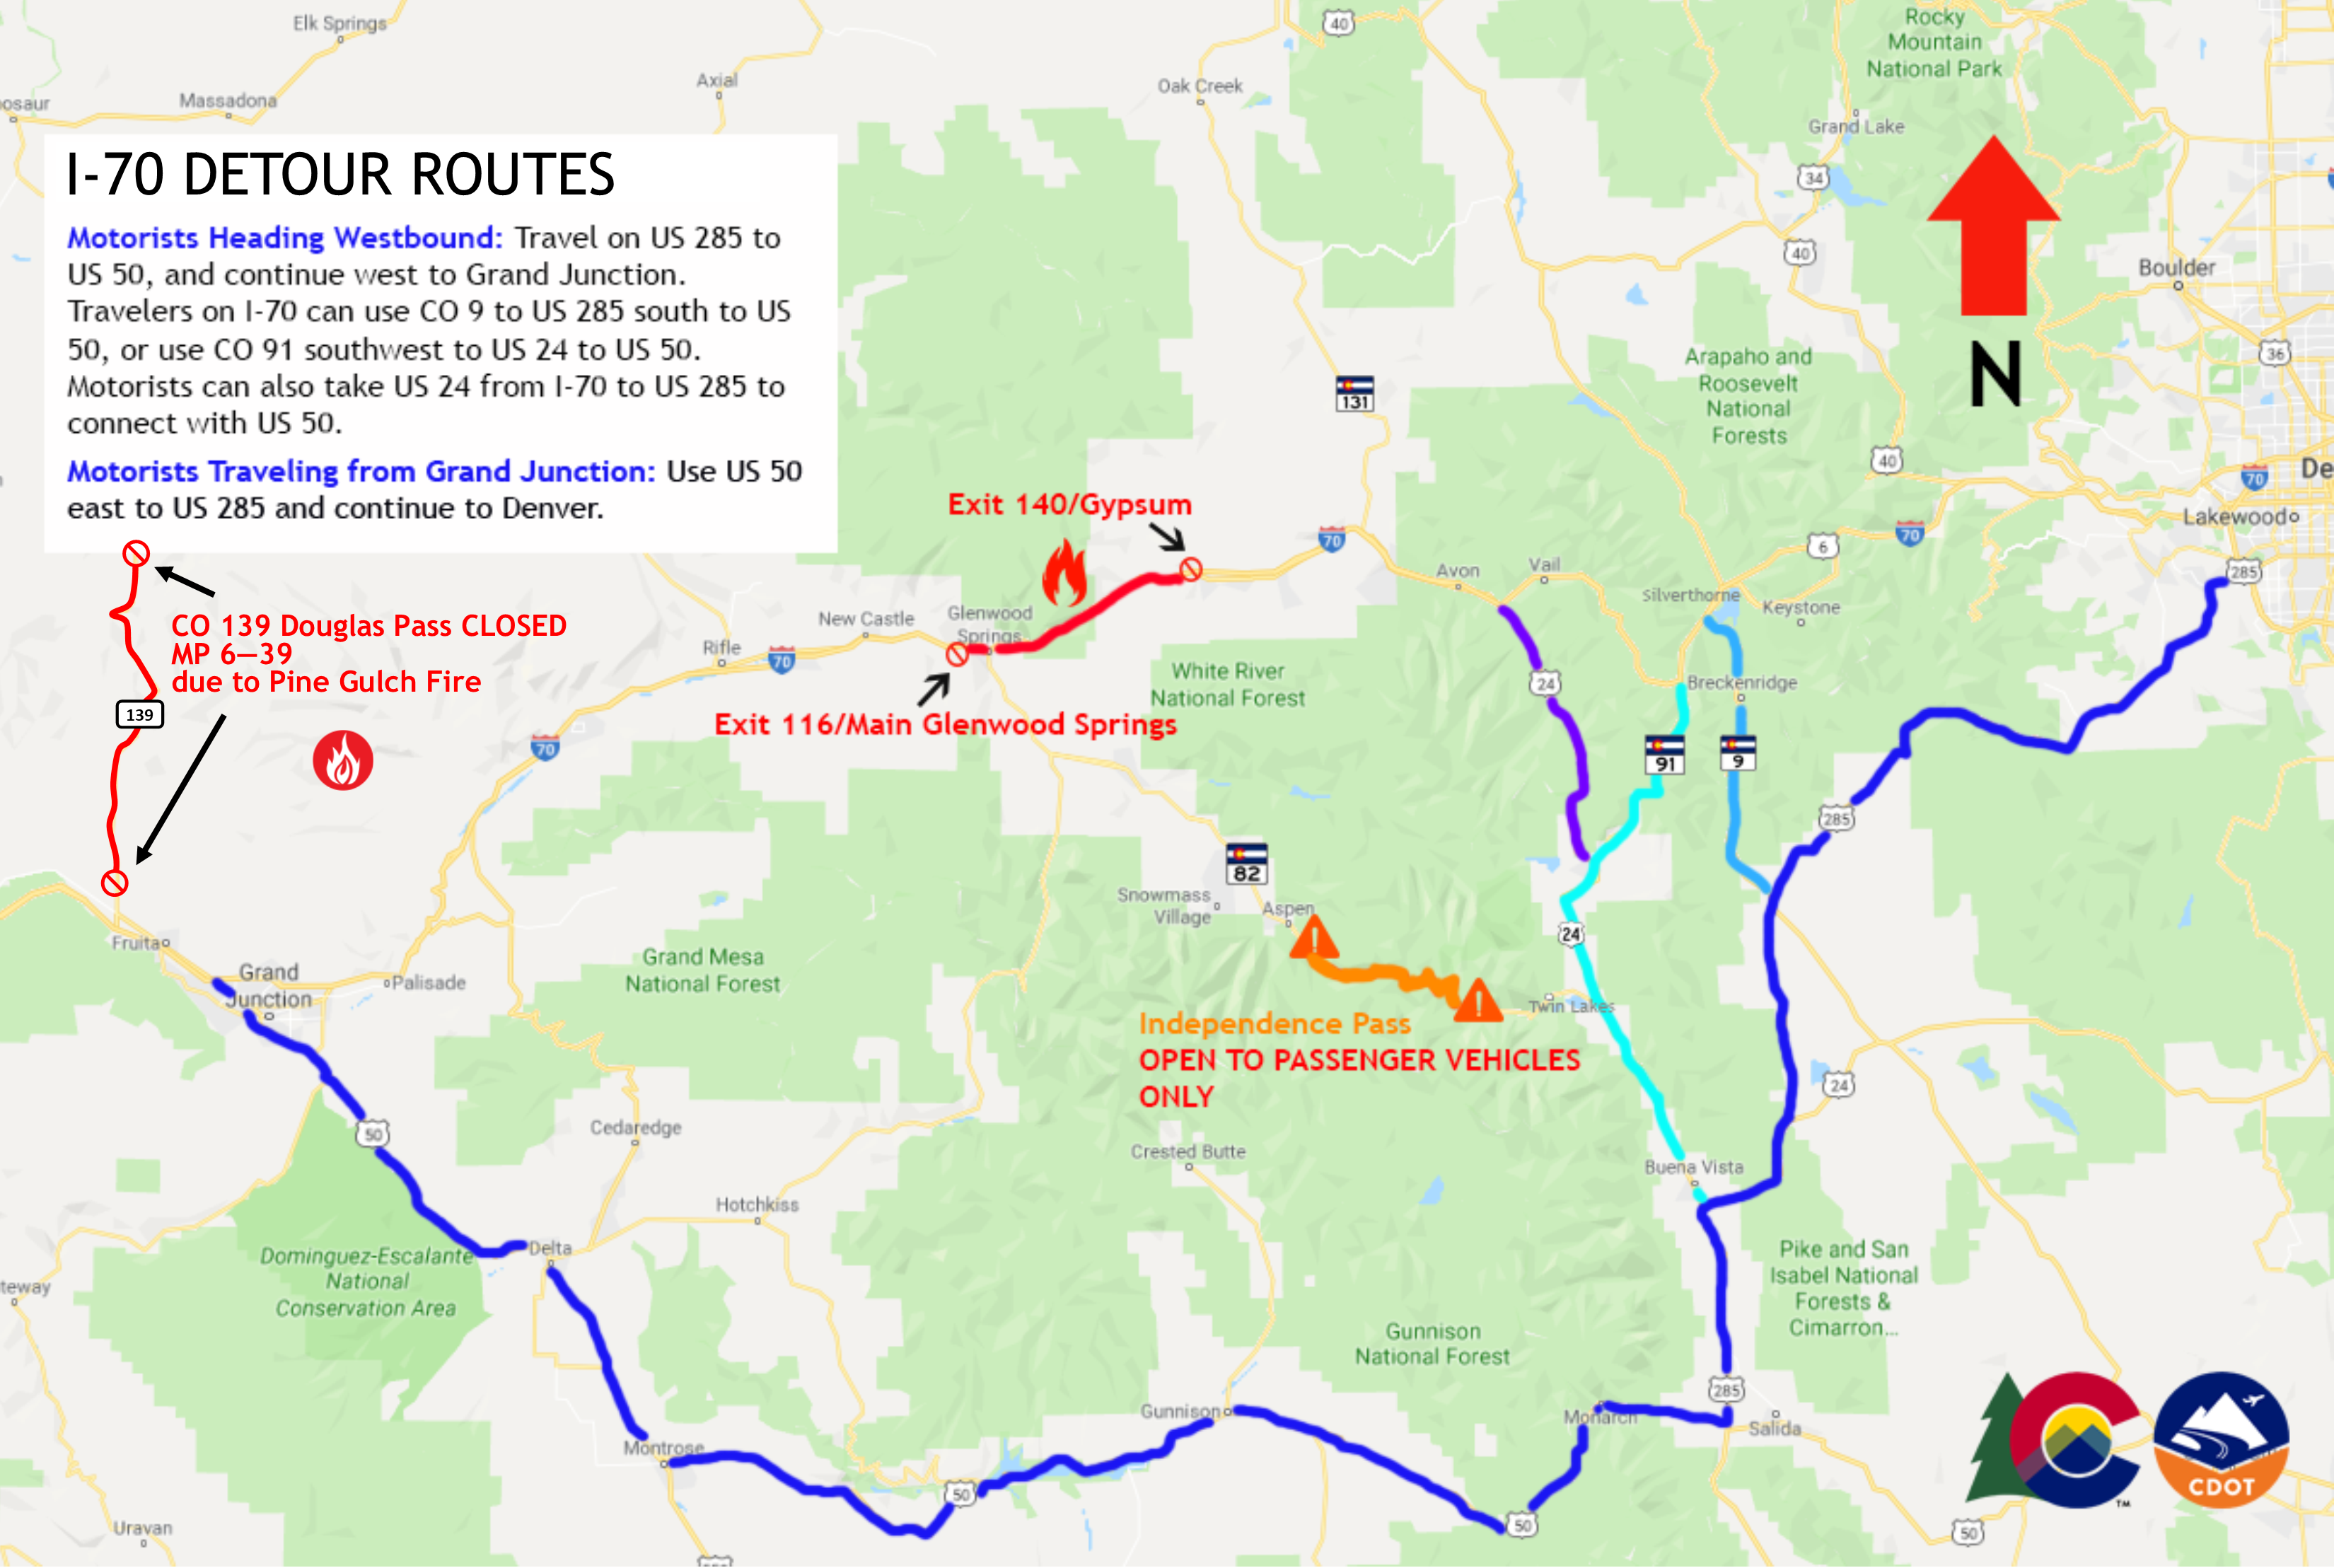 I-70 southern detour route due to Grizzly Creek Fire in Glenwood Canyon closure added CO 139 Doug Pass closure detail image